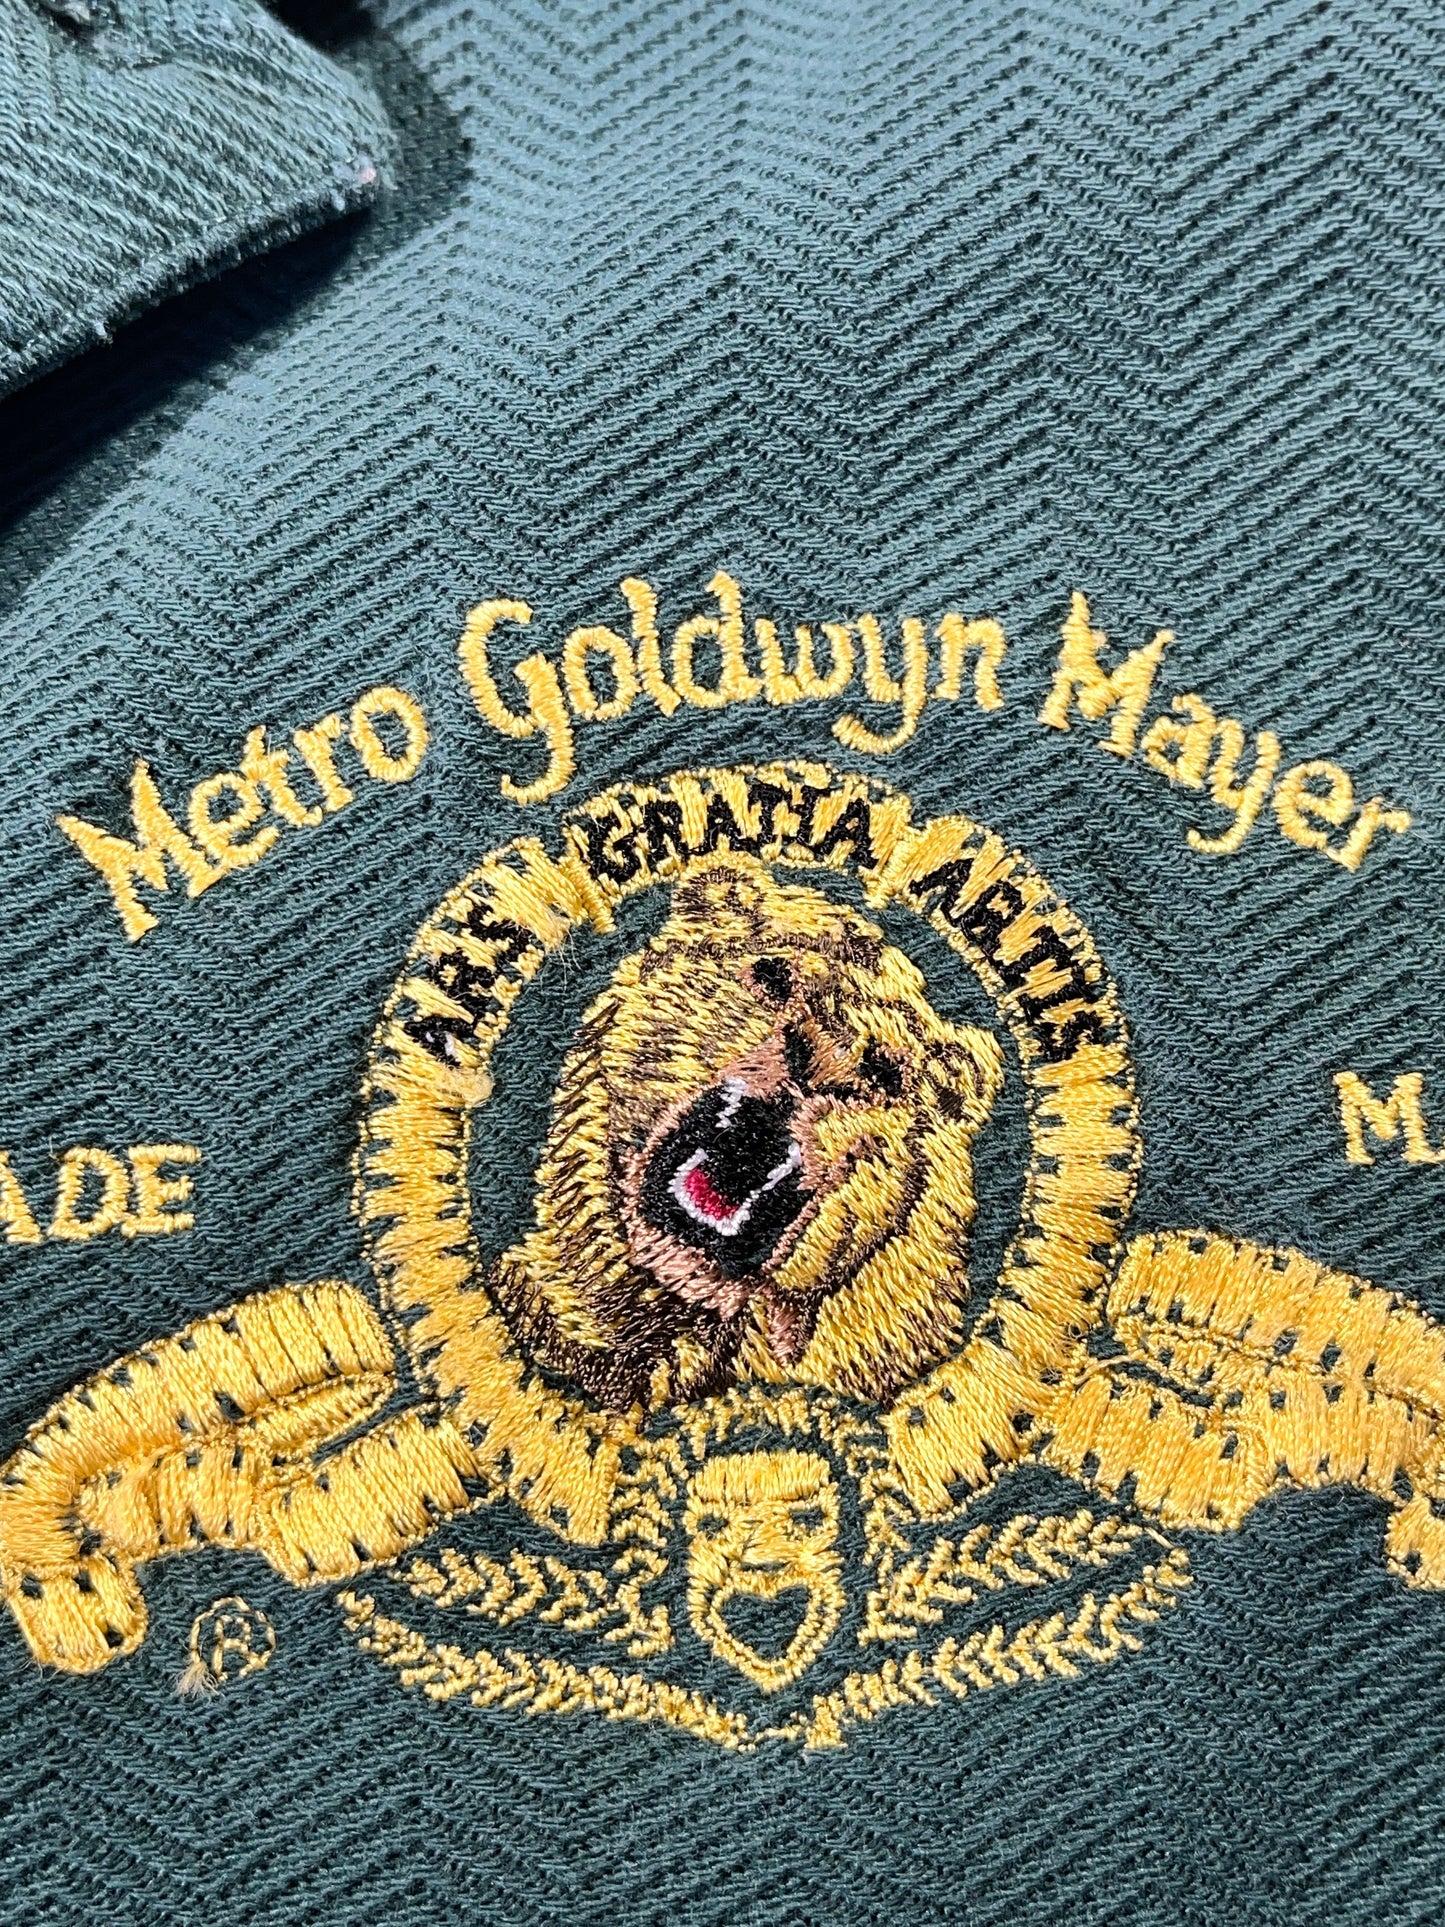 Vintage Lion Polo Shirt Movies Metro Goldwyn Mayer Embroidered Top